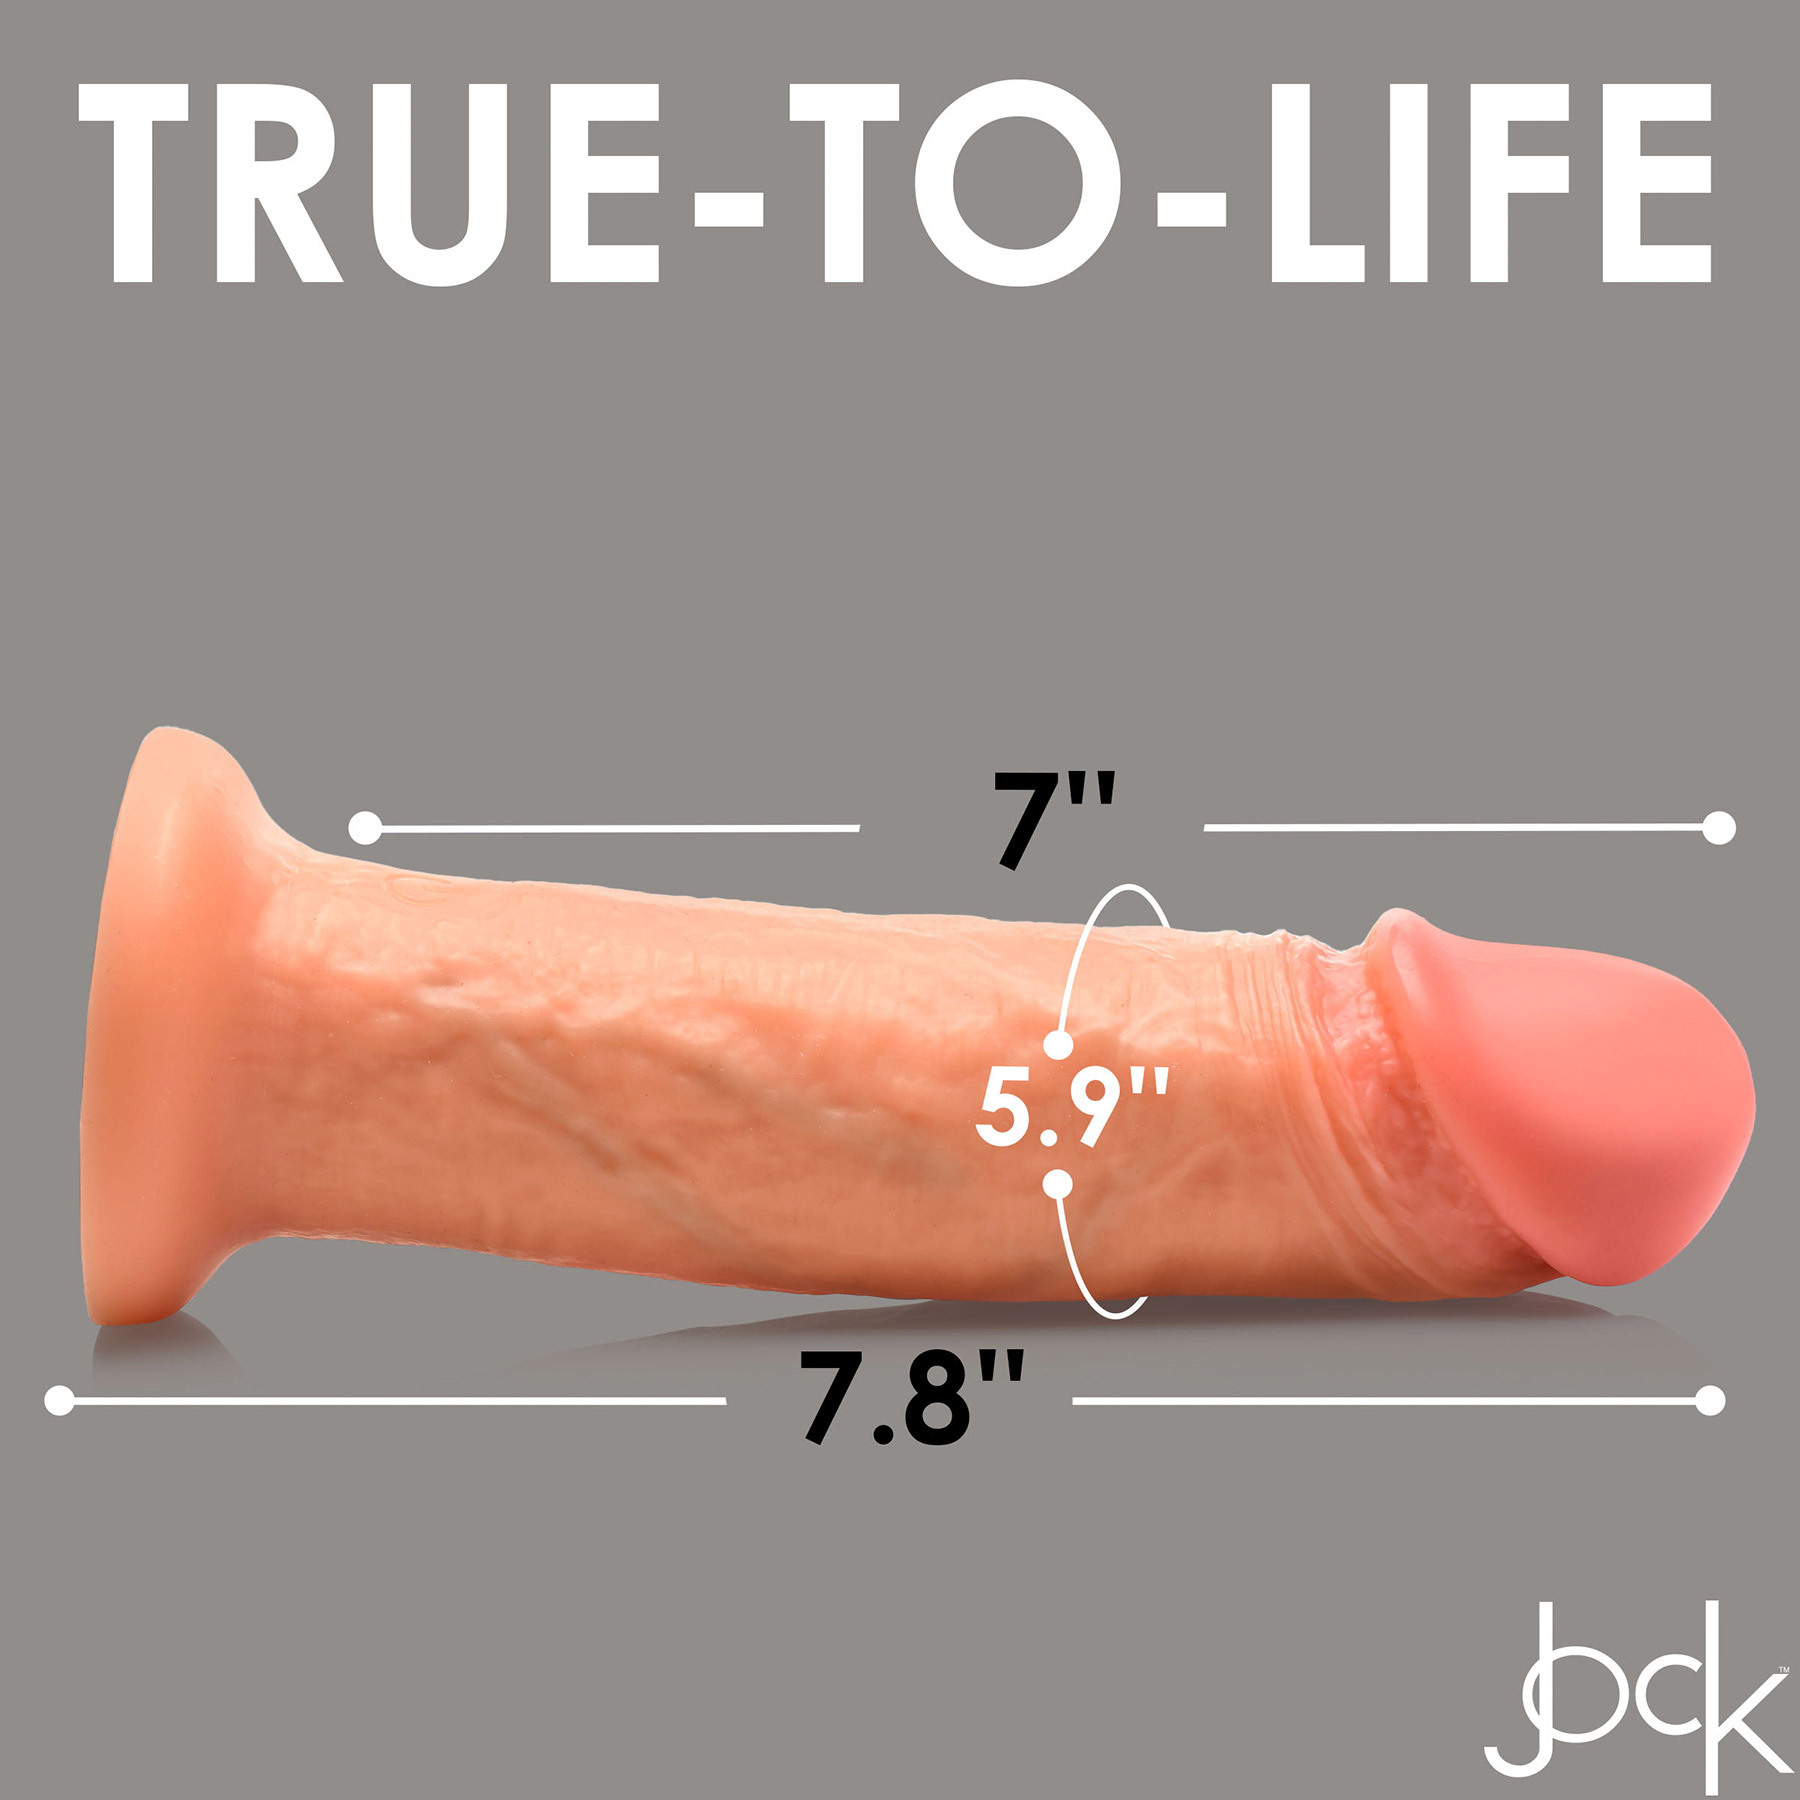 Jock Dual Density 8" Real Skin Rechargeable Vibrating Realistic Silicone Suction Cup Dildo - Measurements